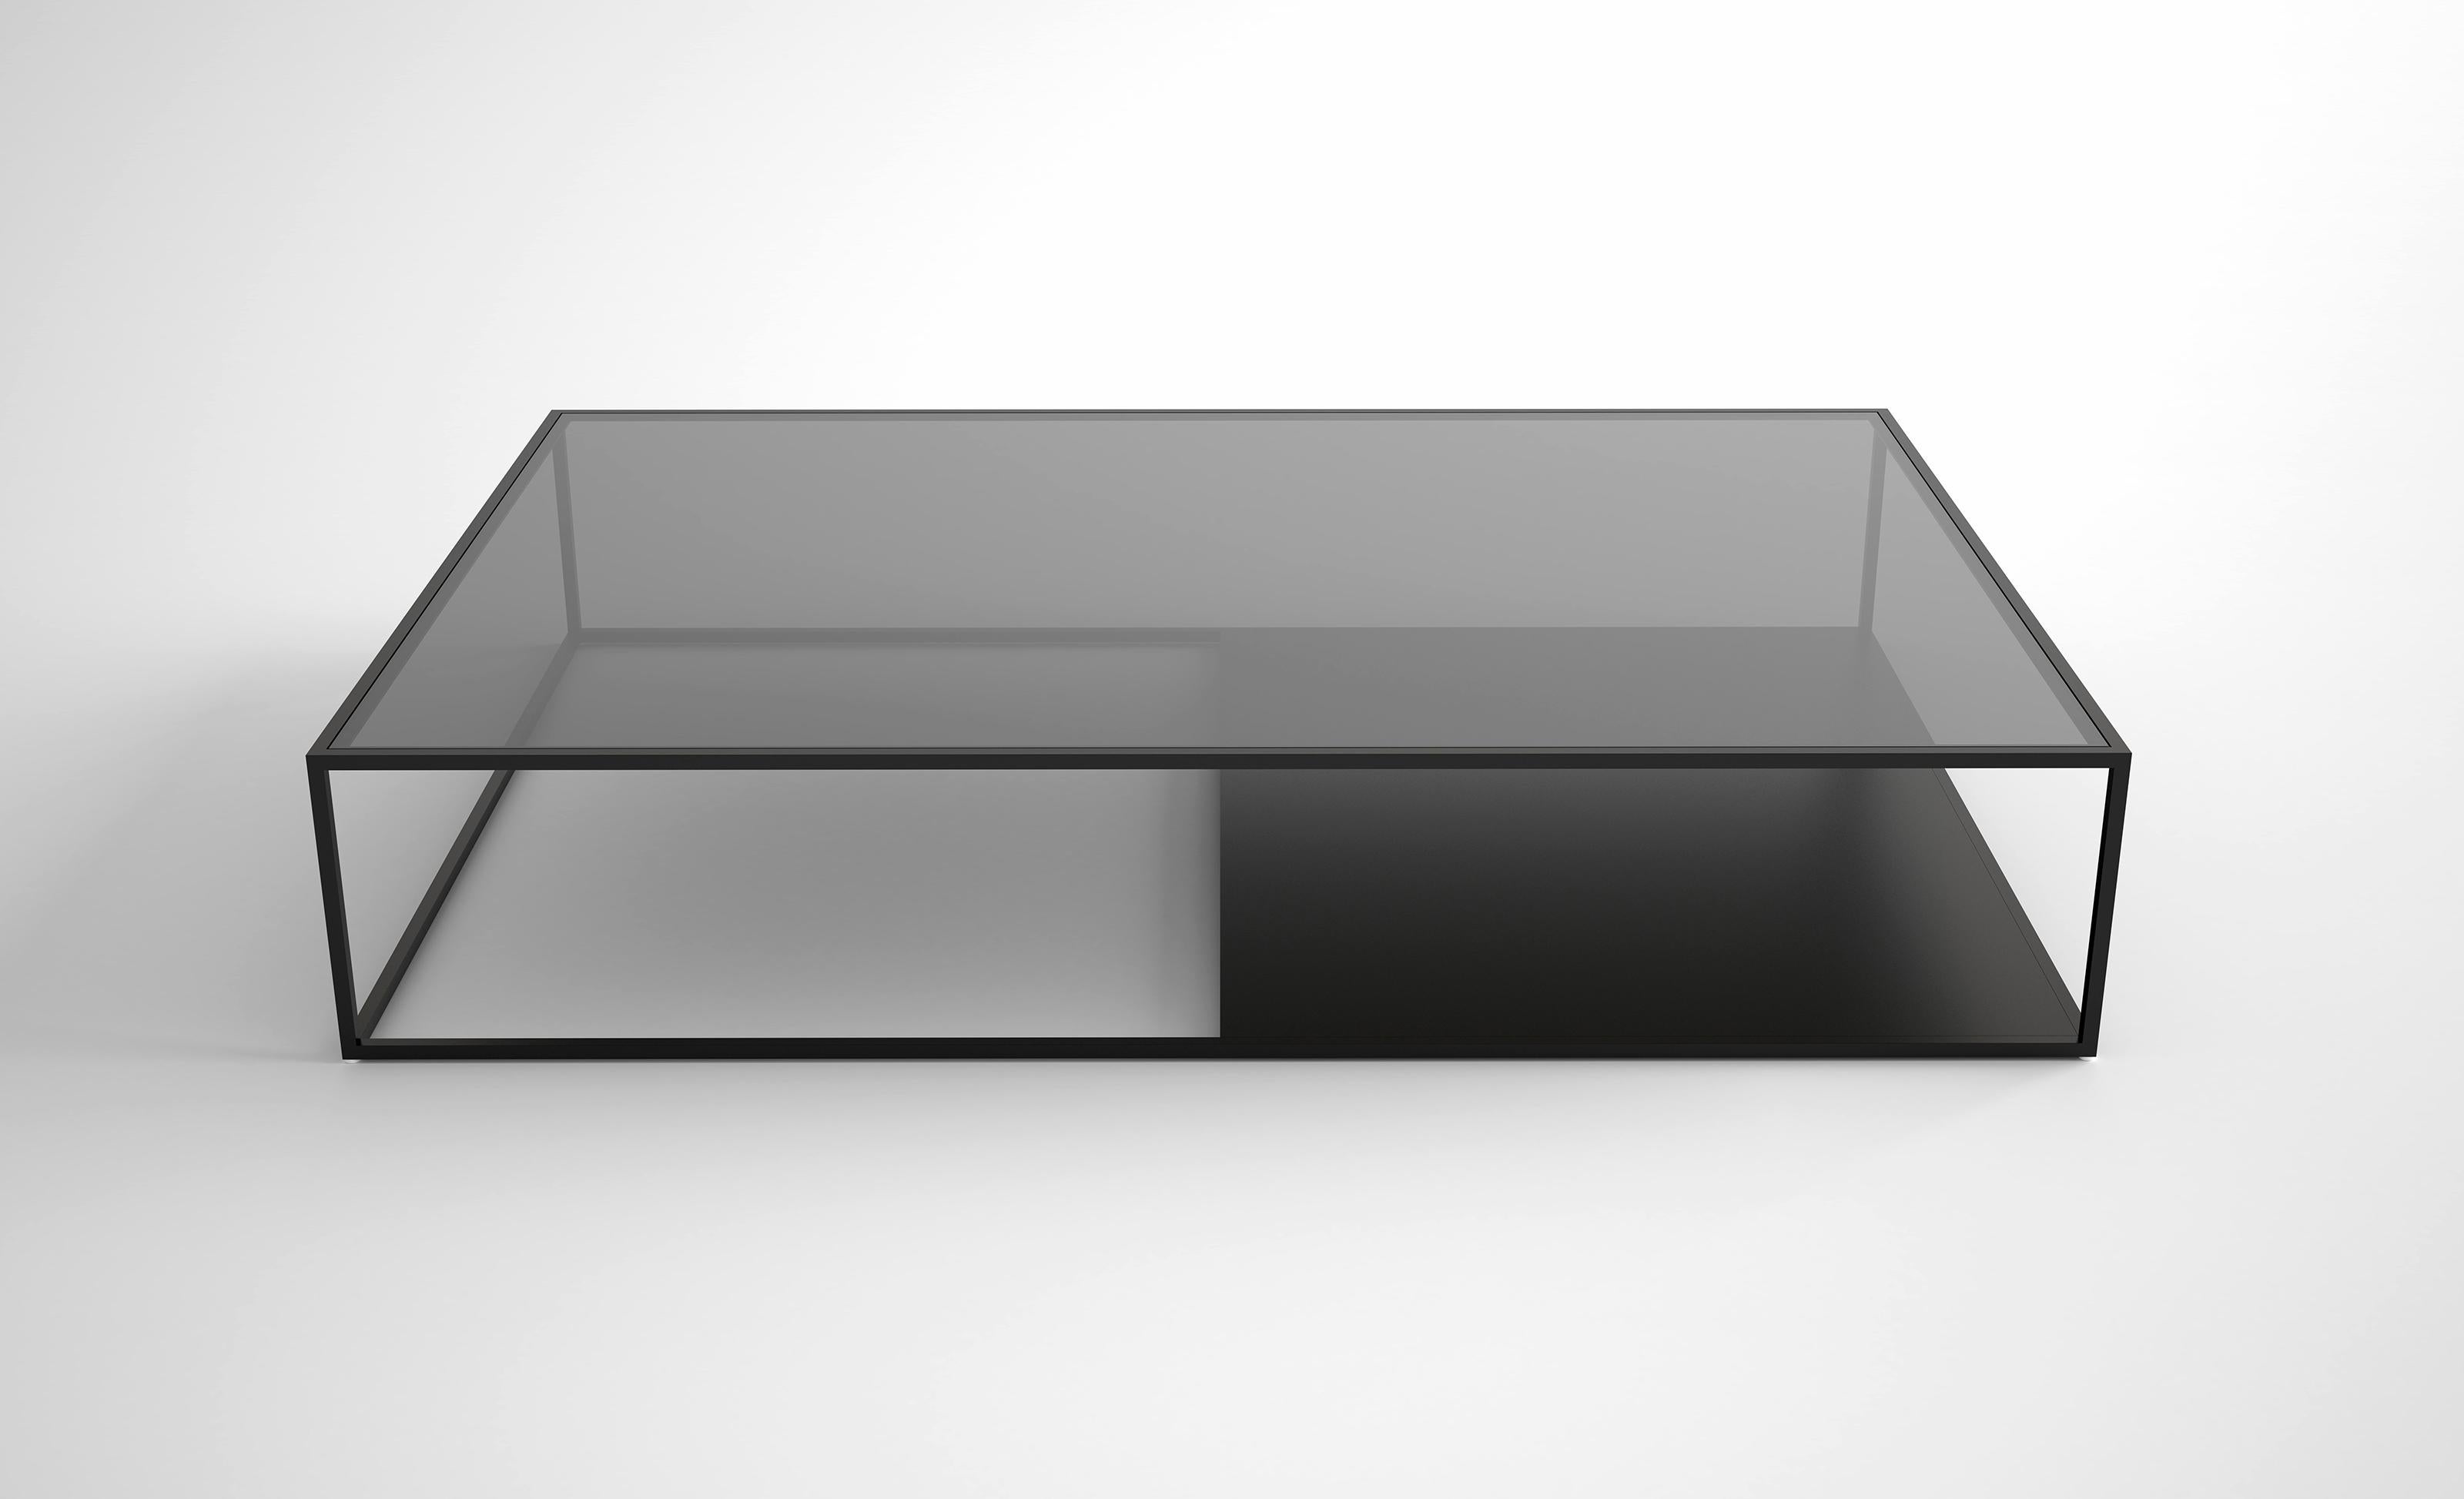 Half & Half Version A Coffee Table by Phase Design
Dimensions: D 96.5 x W 142.2 x H 26.7 cm. 
Materials: Powder-coated metal and glass. 

Powder-coated square steel bar available with starphire or grey glass top. Powder coat finishes are available